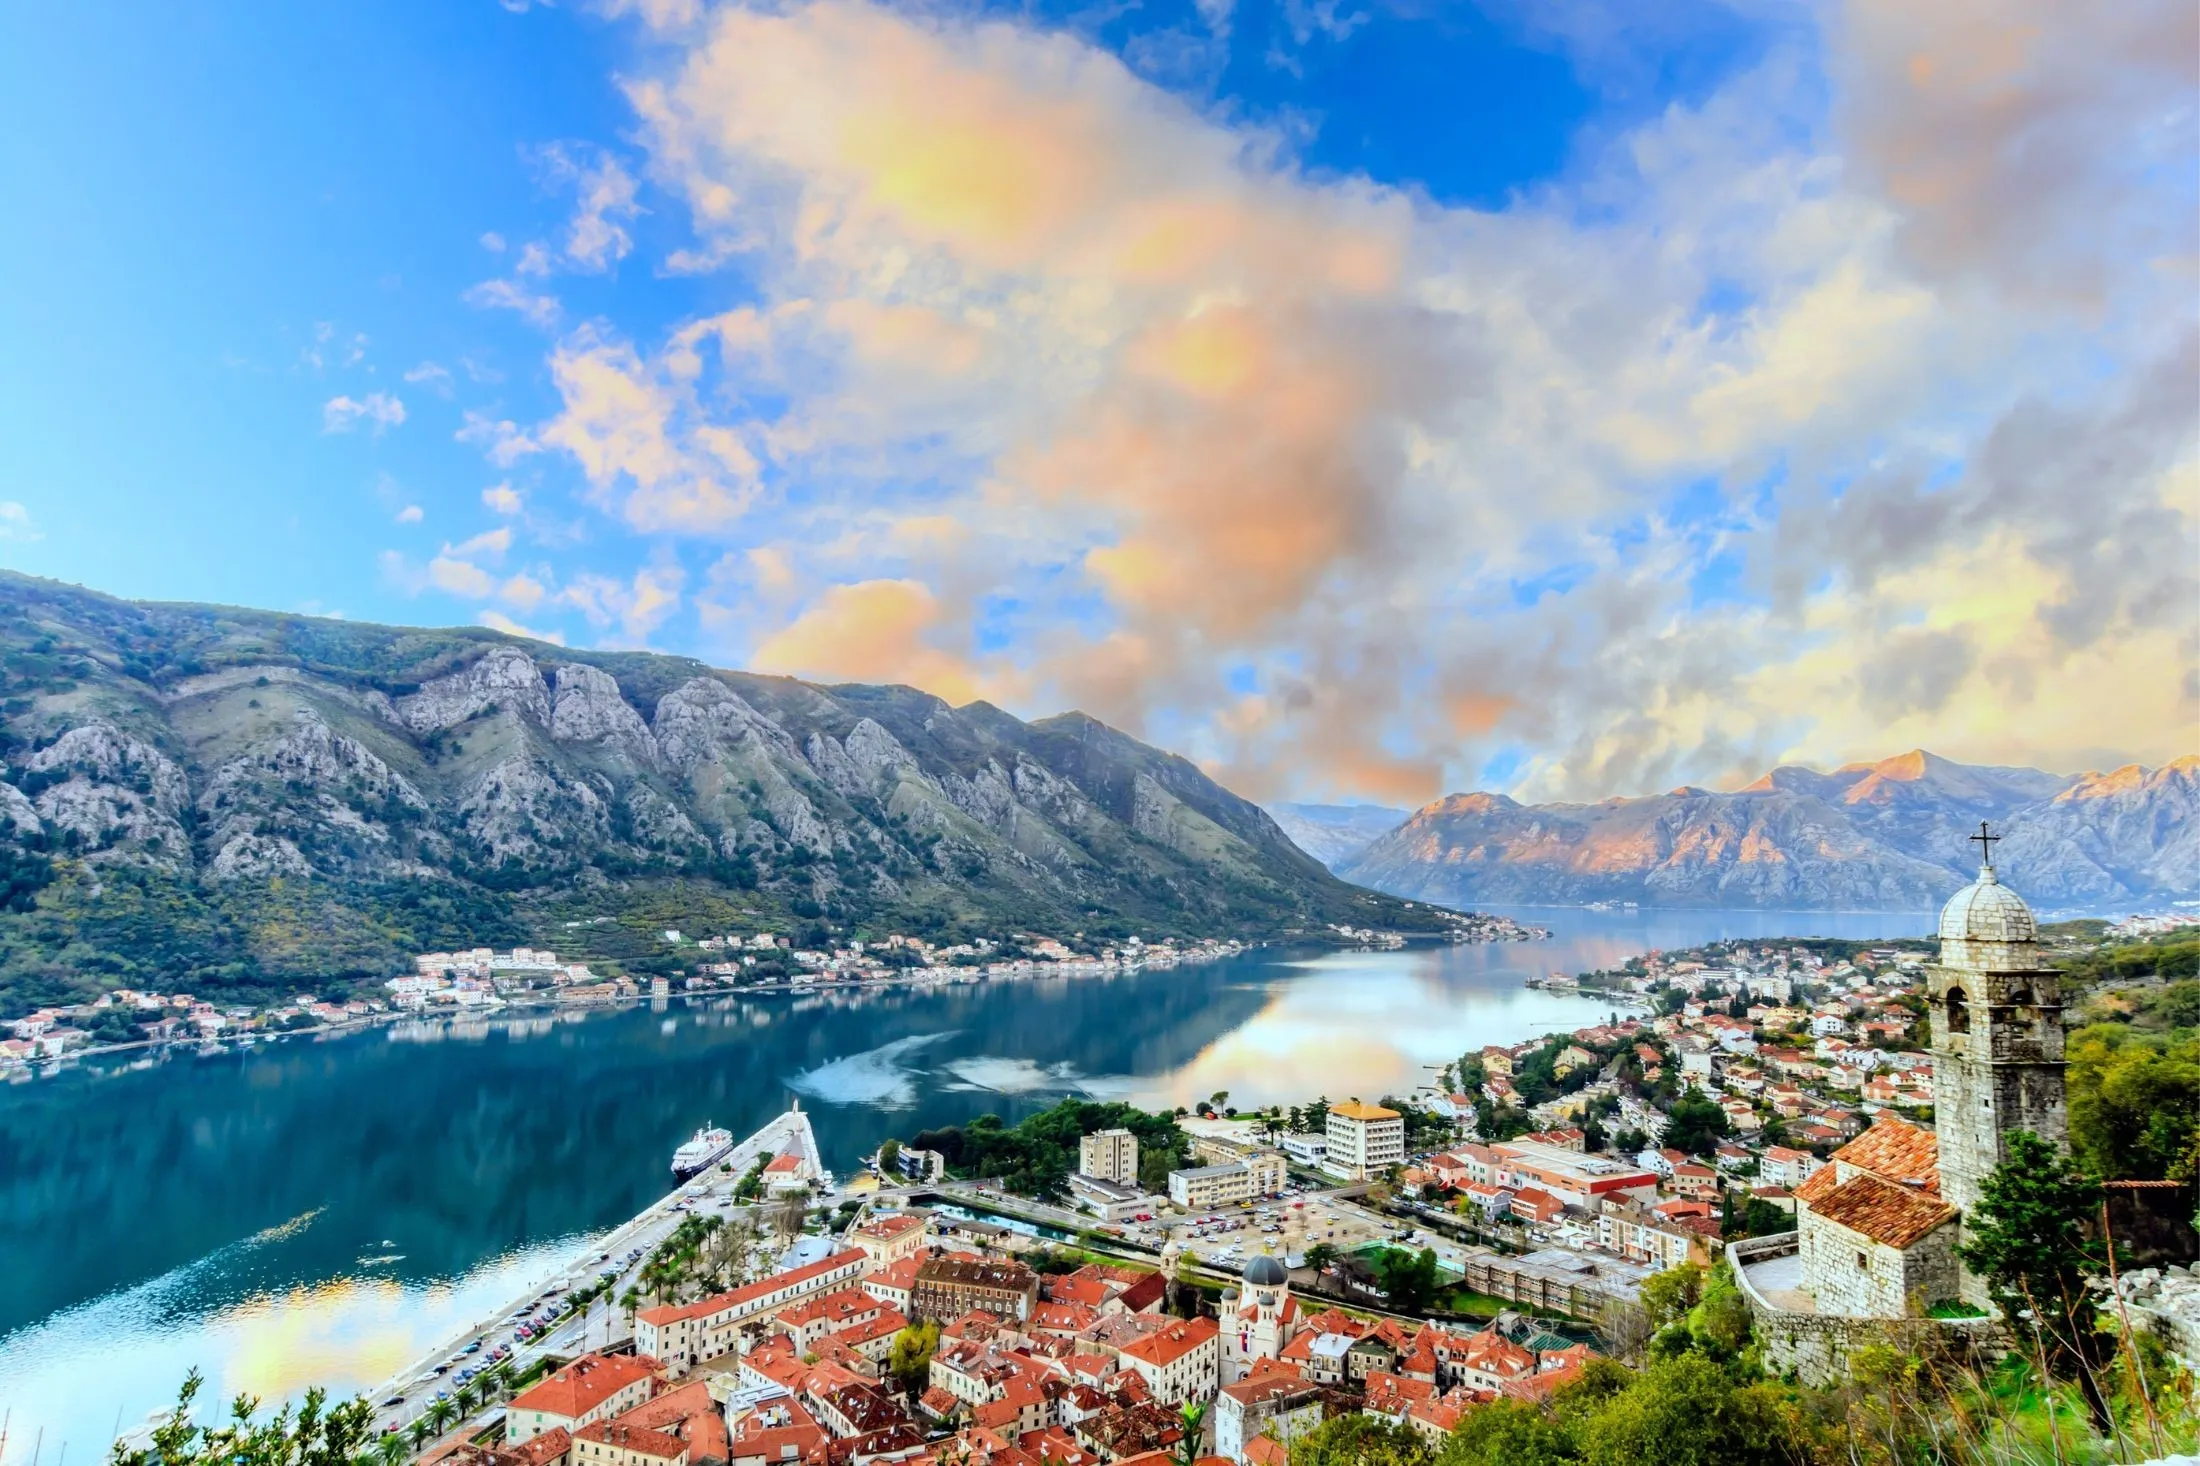 Kotor – the City of Myths and Legends